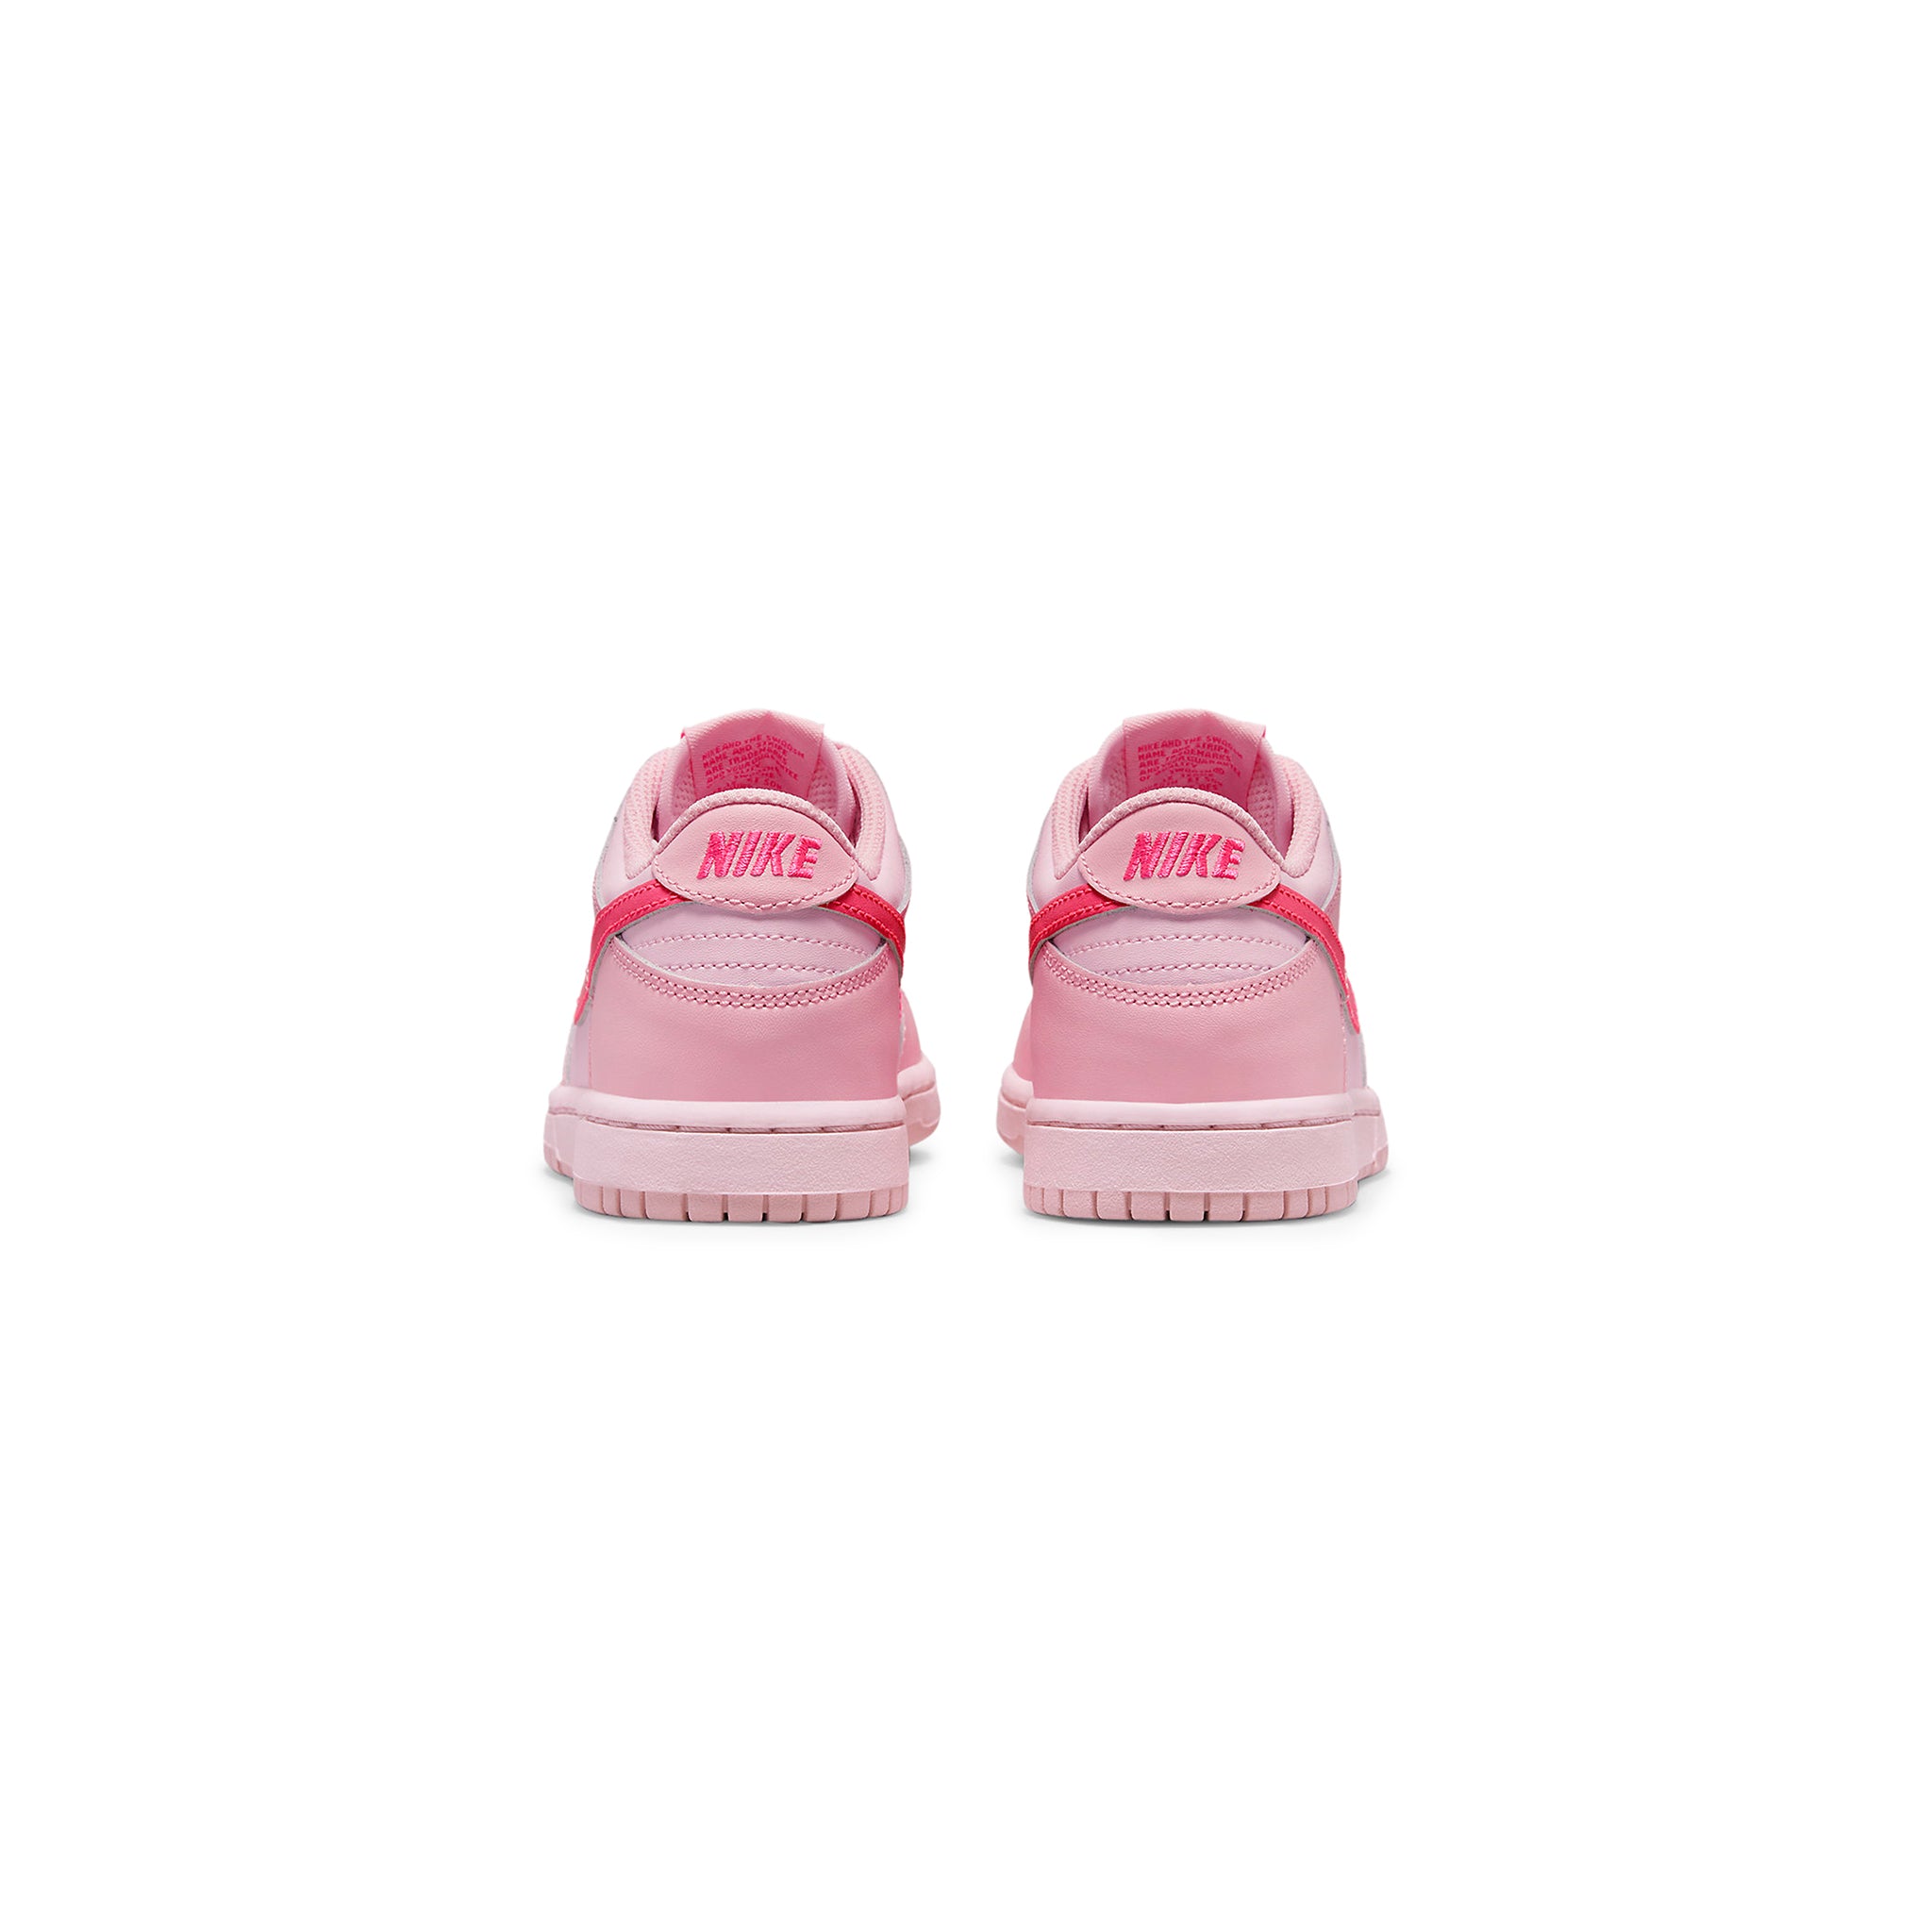 Back view of Nike Dunk Low Triple Pink (PS) DH9756-600